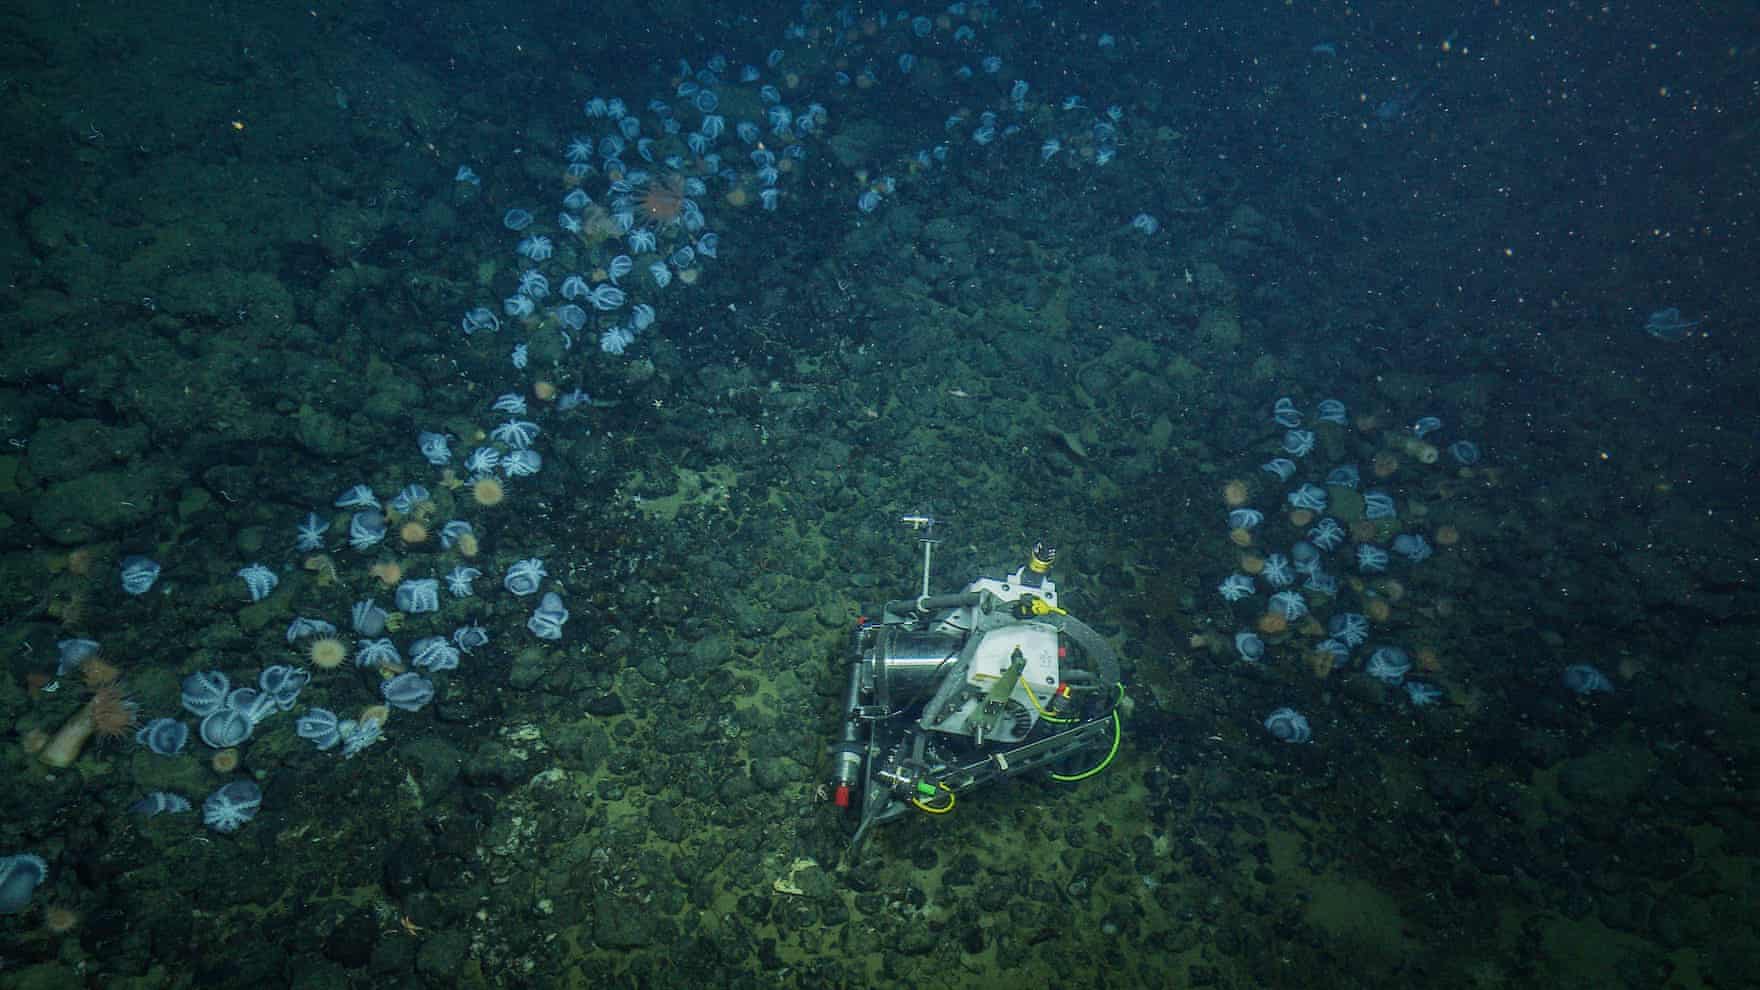 Discovered in the deep: an octopus’s garden in the shade (theguardian.com)